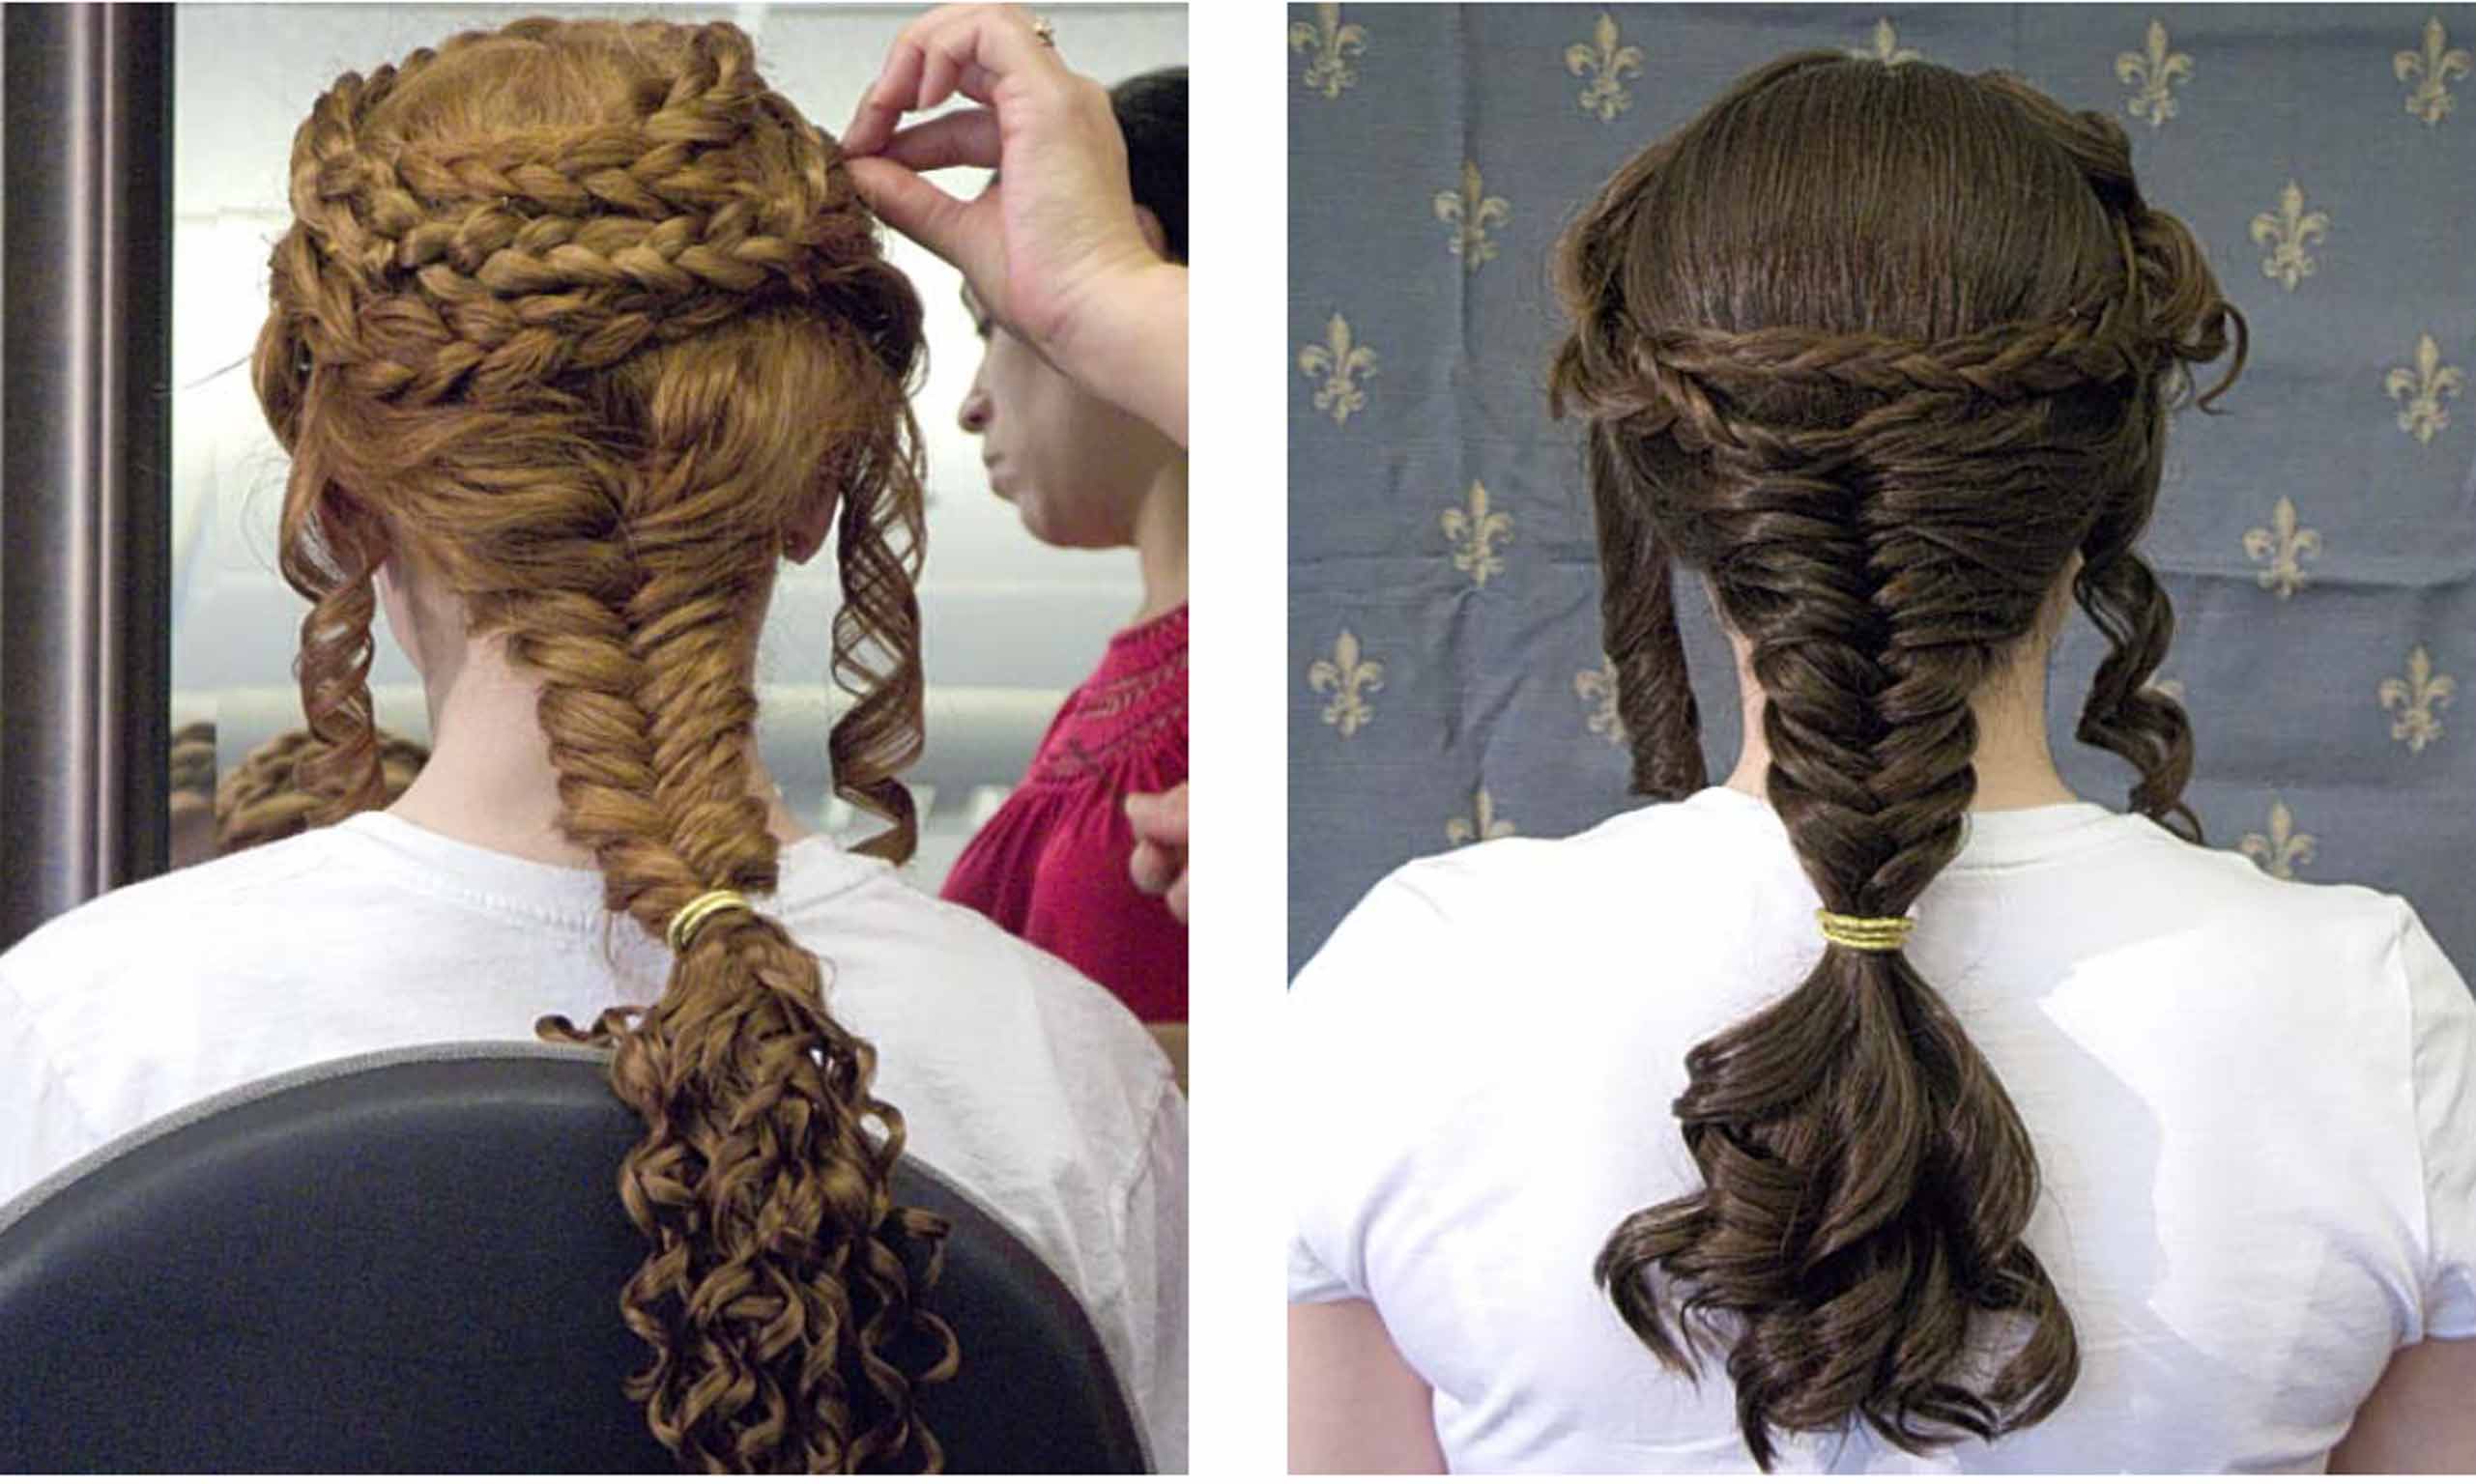 Traditional hairstyles in ancient Greece. - SuperStock